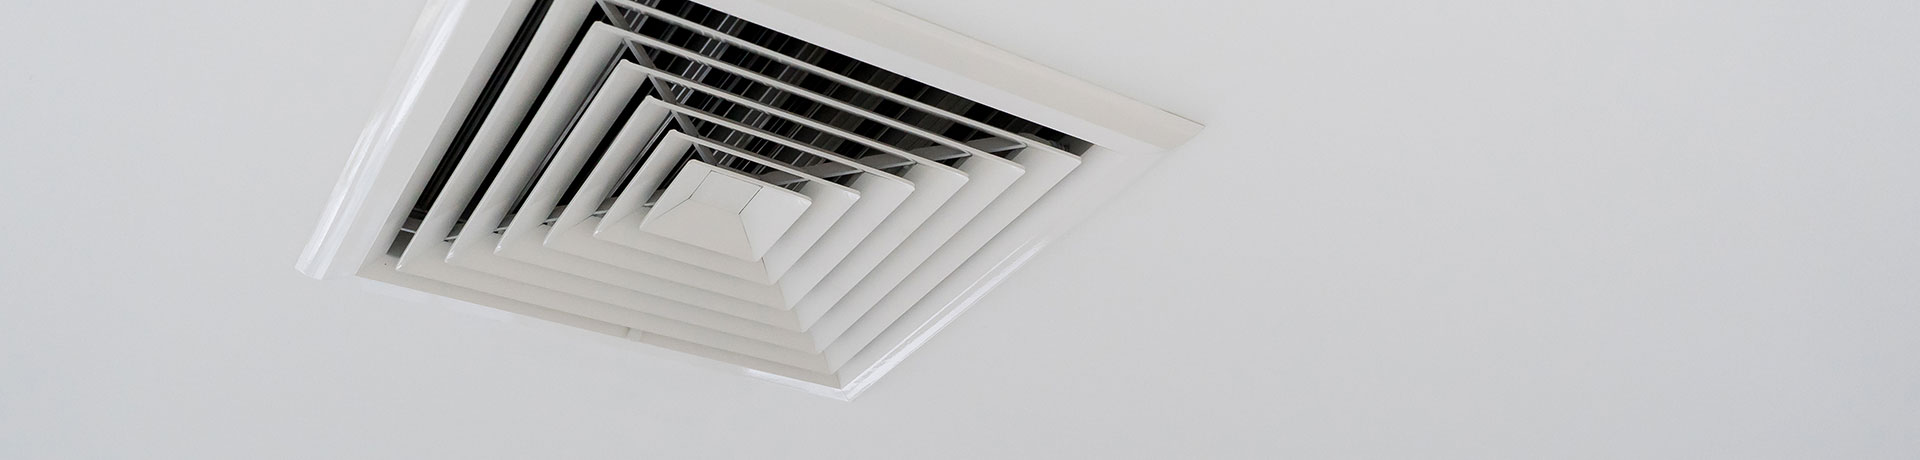 Close up of an air vent in a commercial setting